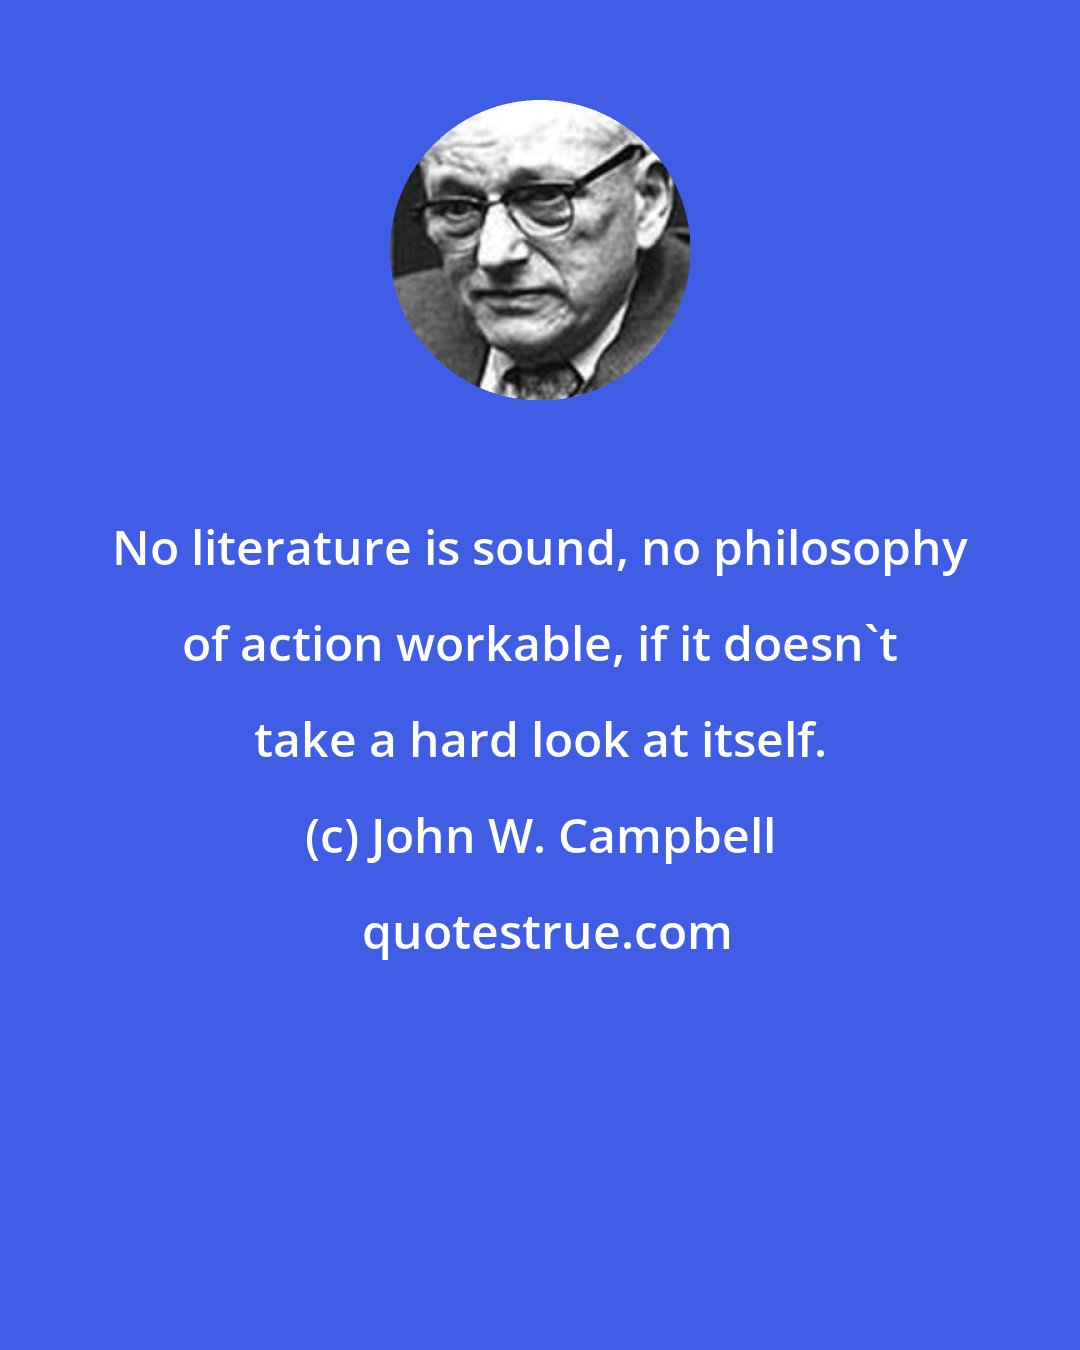 John W. Campbell: No literature is sound, no philosophy of action workable, if it doesn't take a hard look at itself.